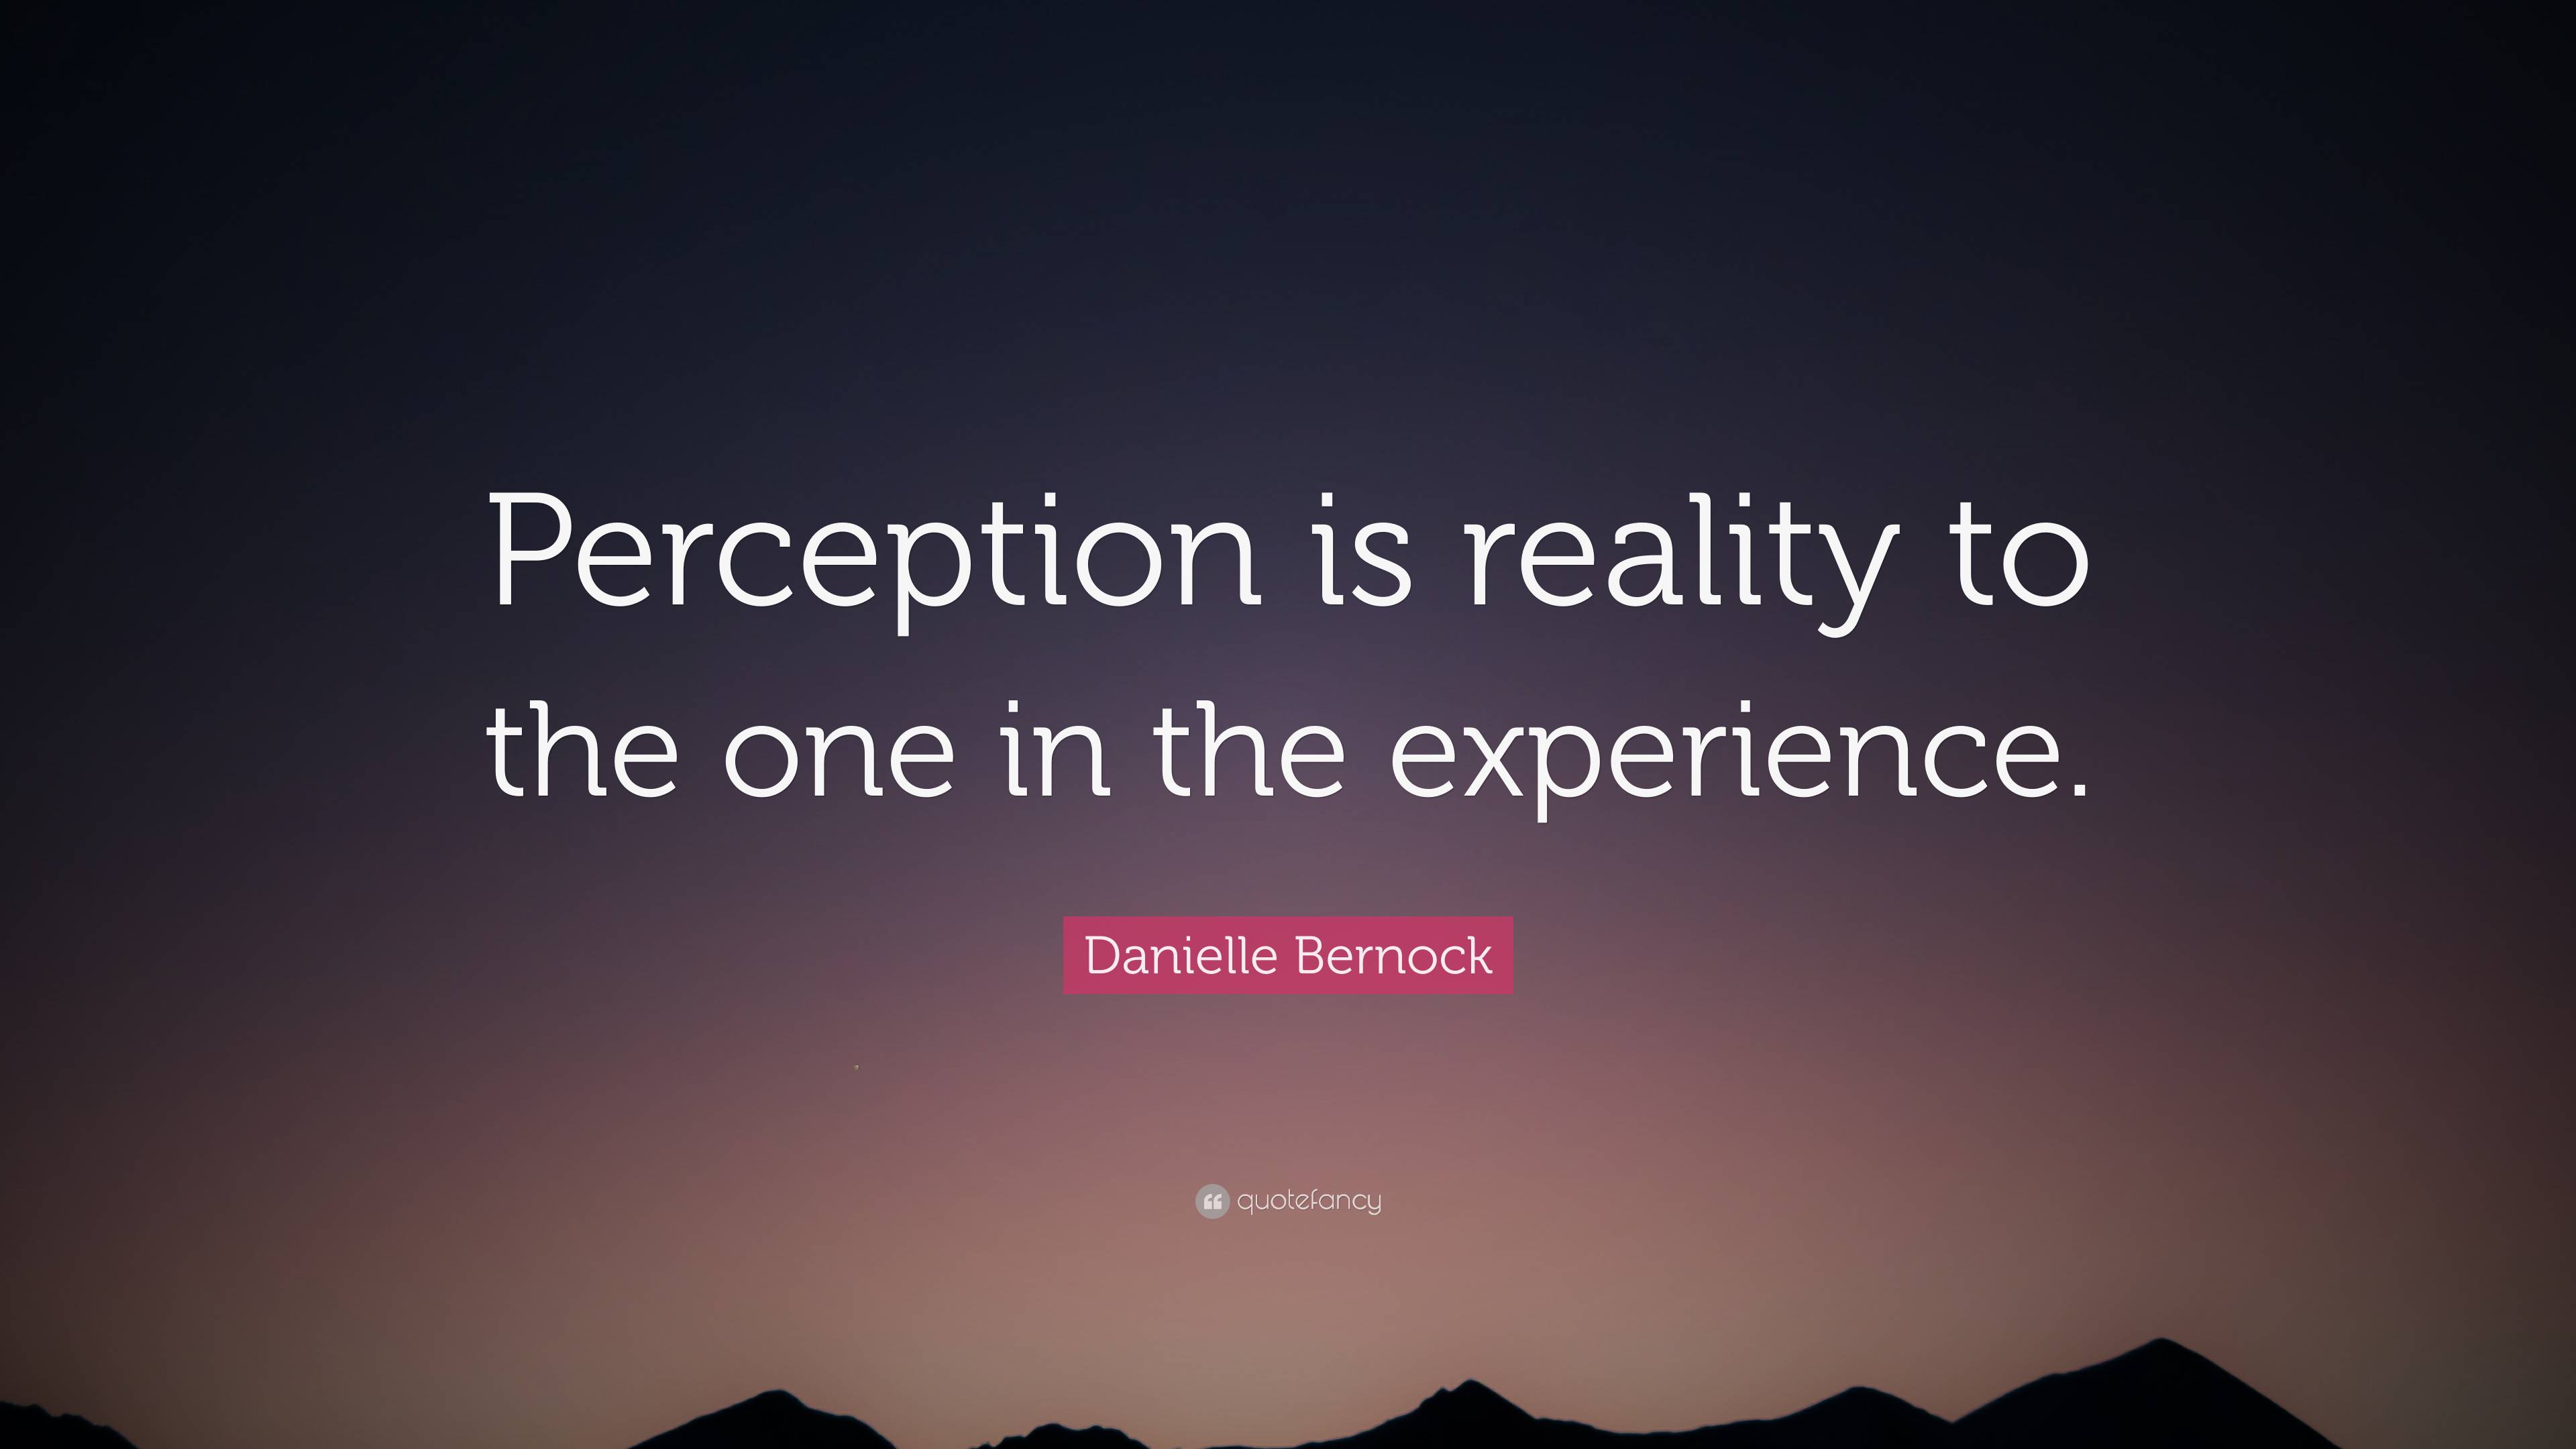 Danielle Bernock Quote: “Perception is reality to the one in the ...